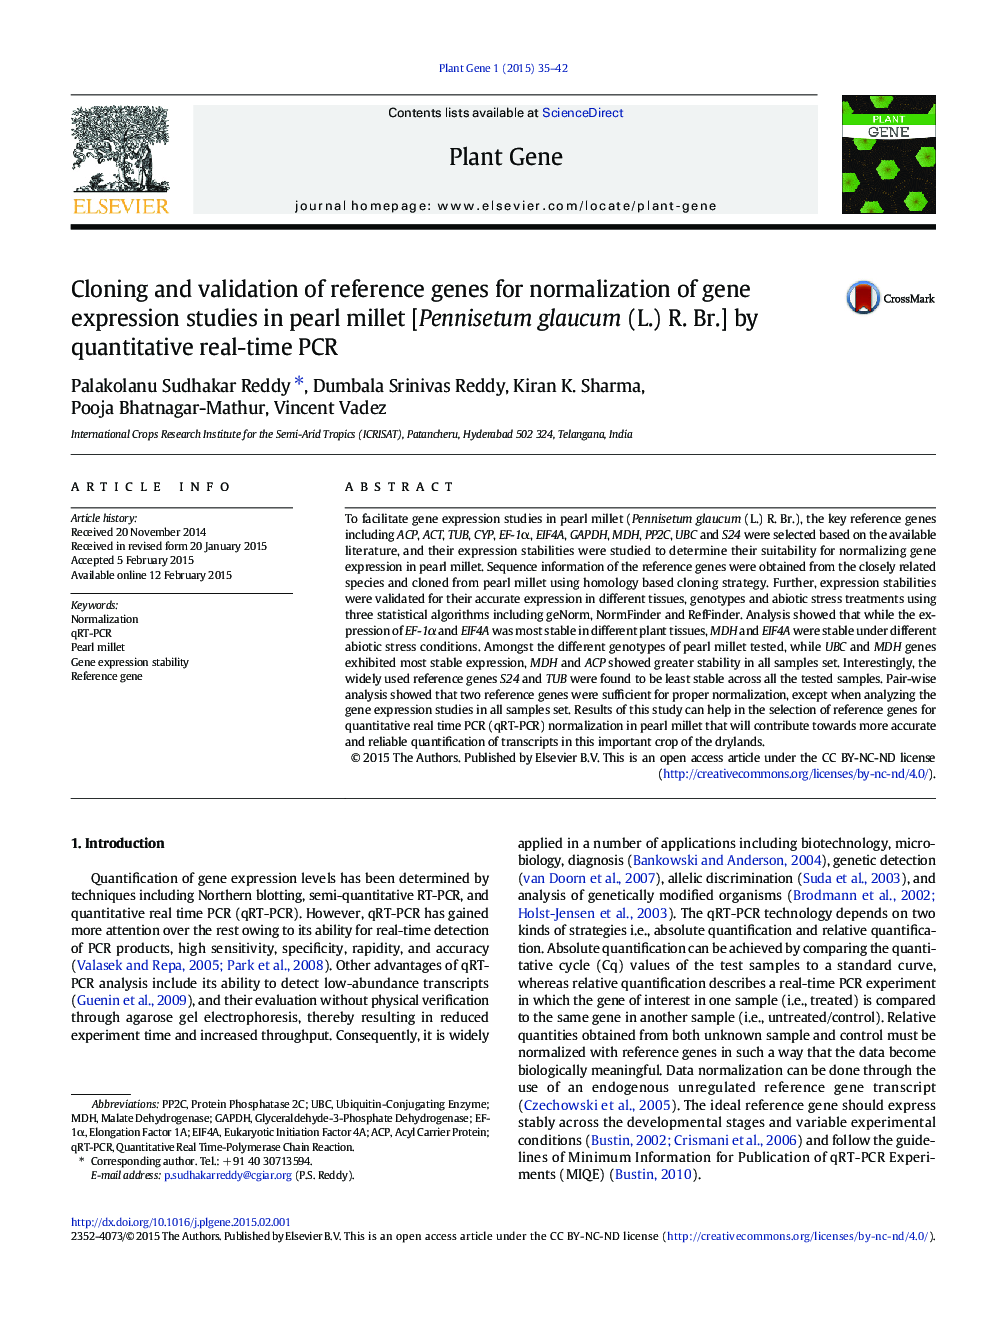 Cloning and validation of reference genes for normalization of gene expression studies in pearl millet [Pennisetum glaucum (L.) R. Br.] by quantitative real-time PCR